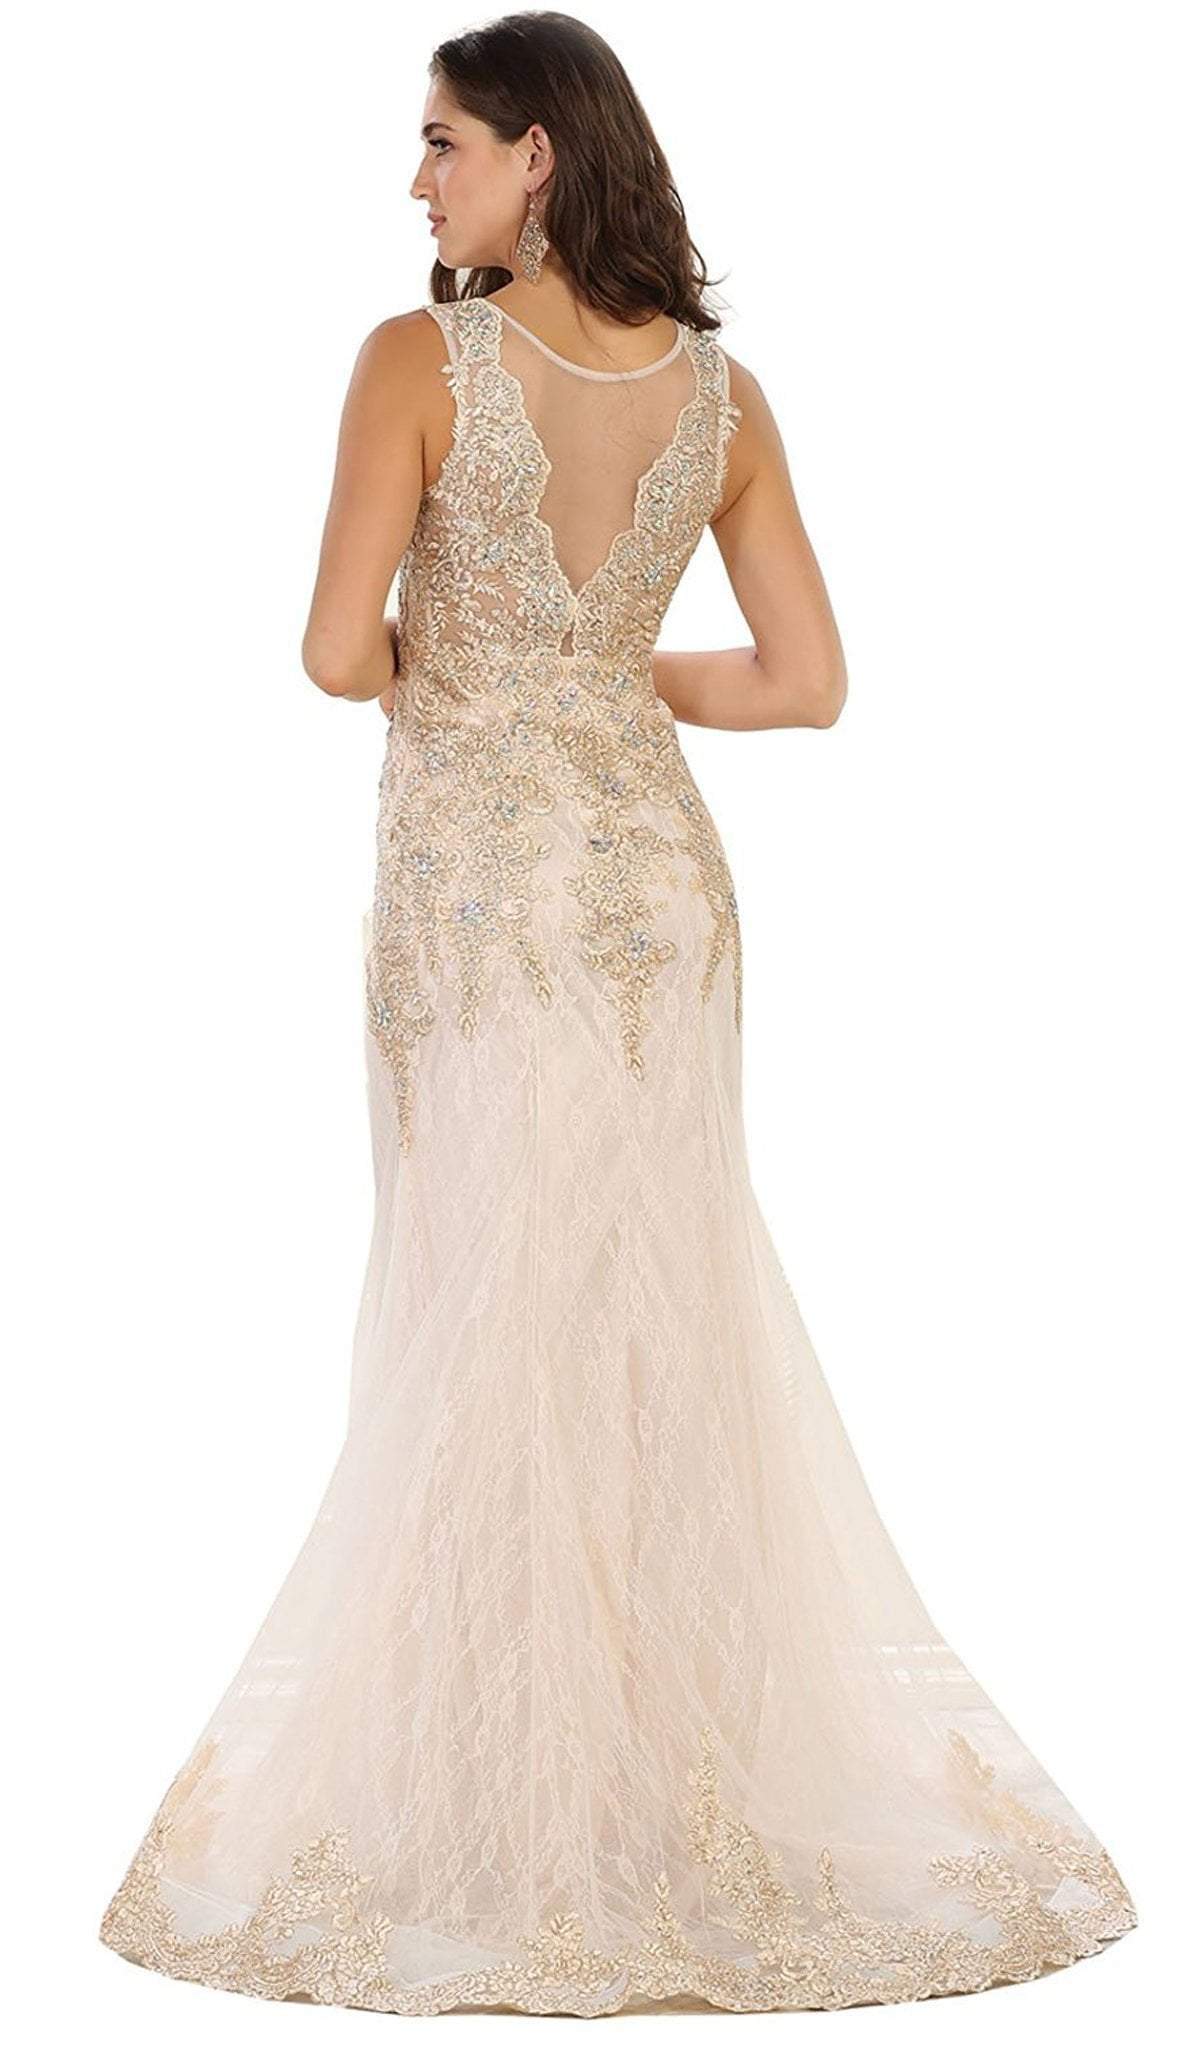 May Queen - Sleeveless Sheer Illusion Evening Gown Special Occasion Dress